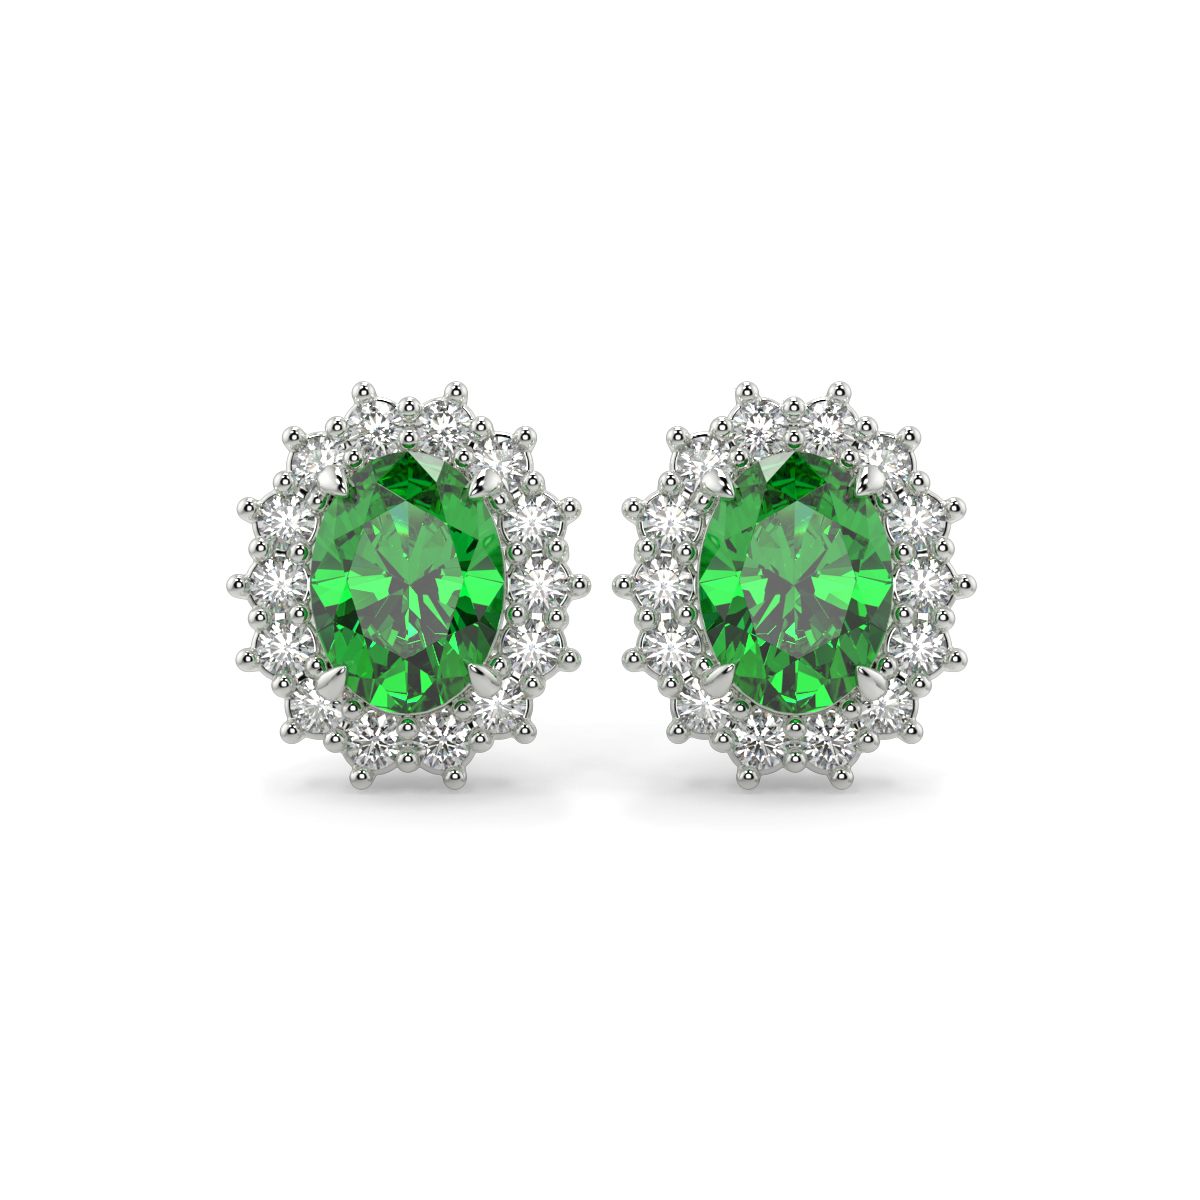 Emerald and Diamond Lady Diana Halo Earrings Platinum - CAMILLE